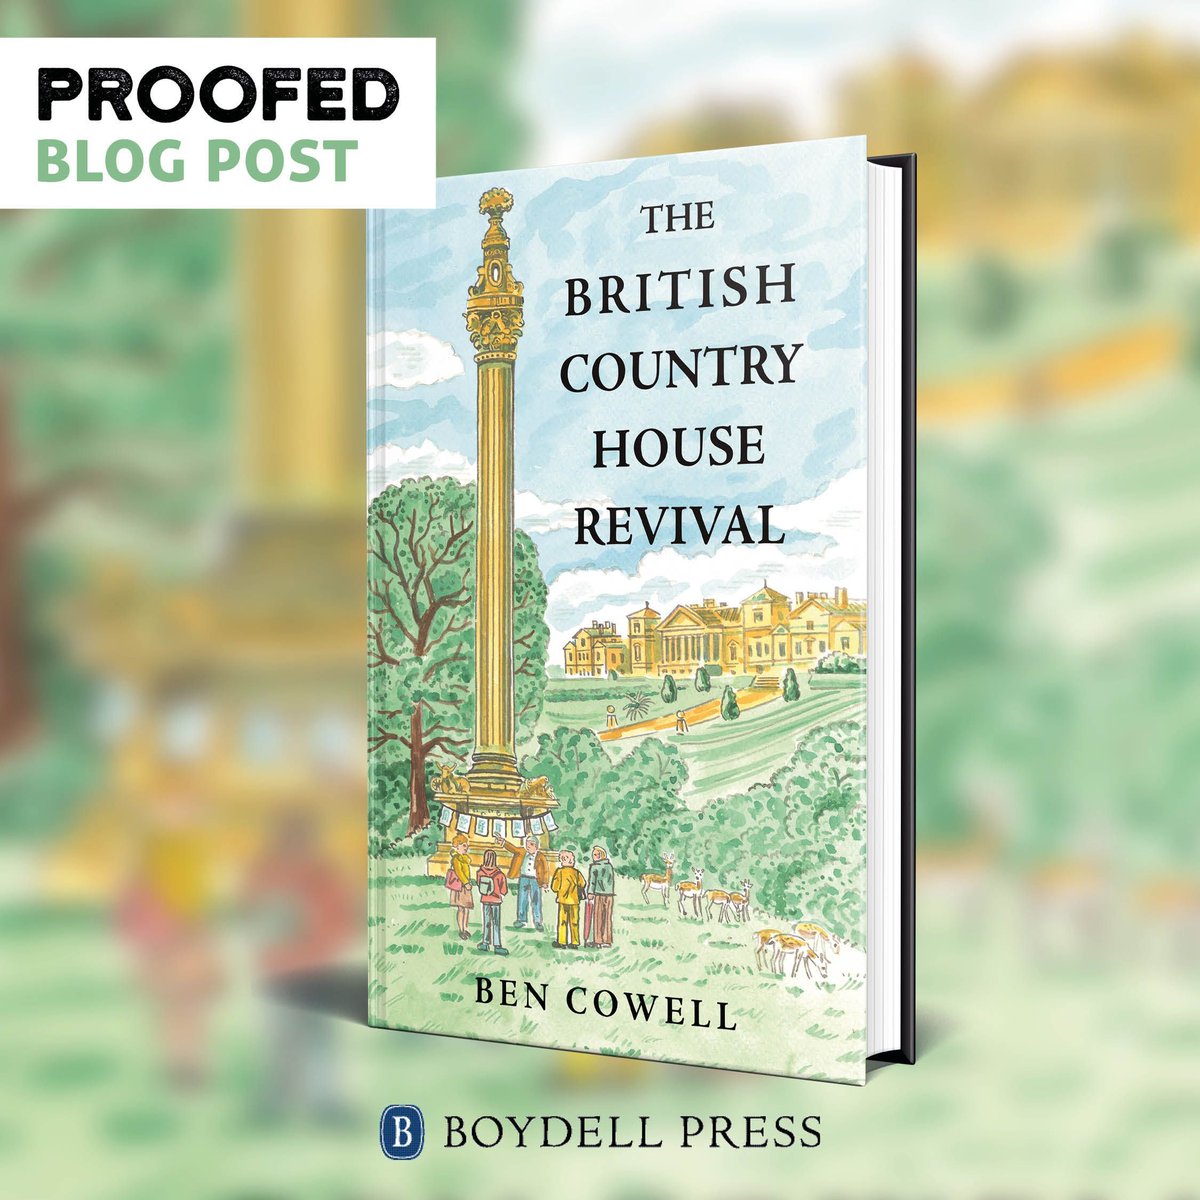 Author of 'The British Country House Revival', Ben Cowell explores the continued relevance of country houses, for tourism, for jobs, and for local history research in our latest blog post: buff.ly/44Mdtlc #ProofedBlog #ModernHistory #SocialHistory #Architecture